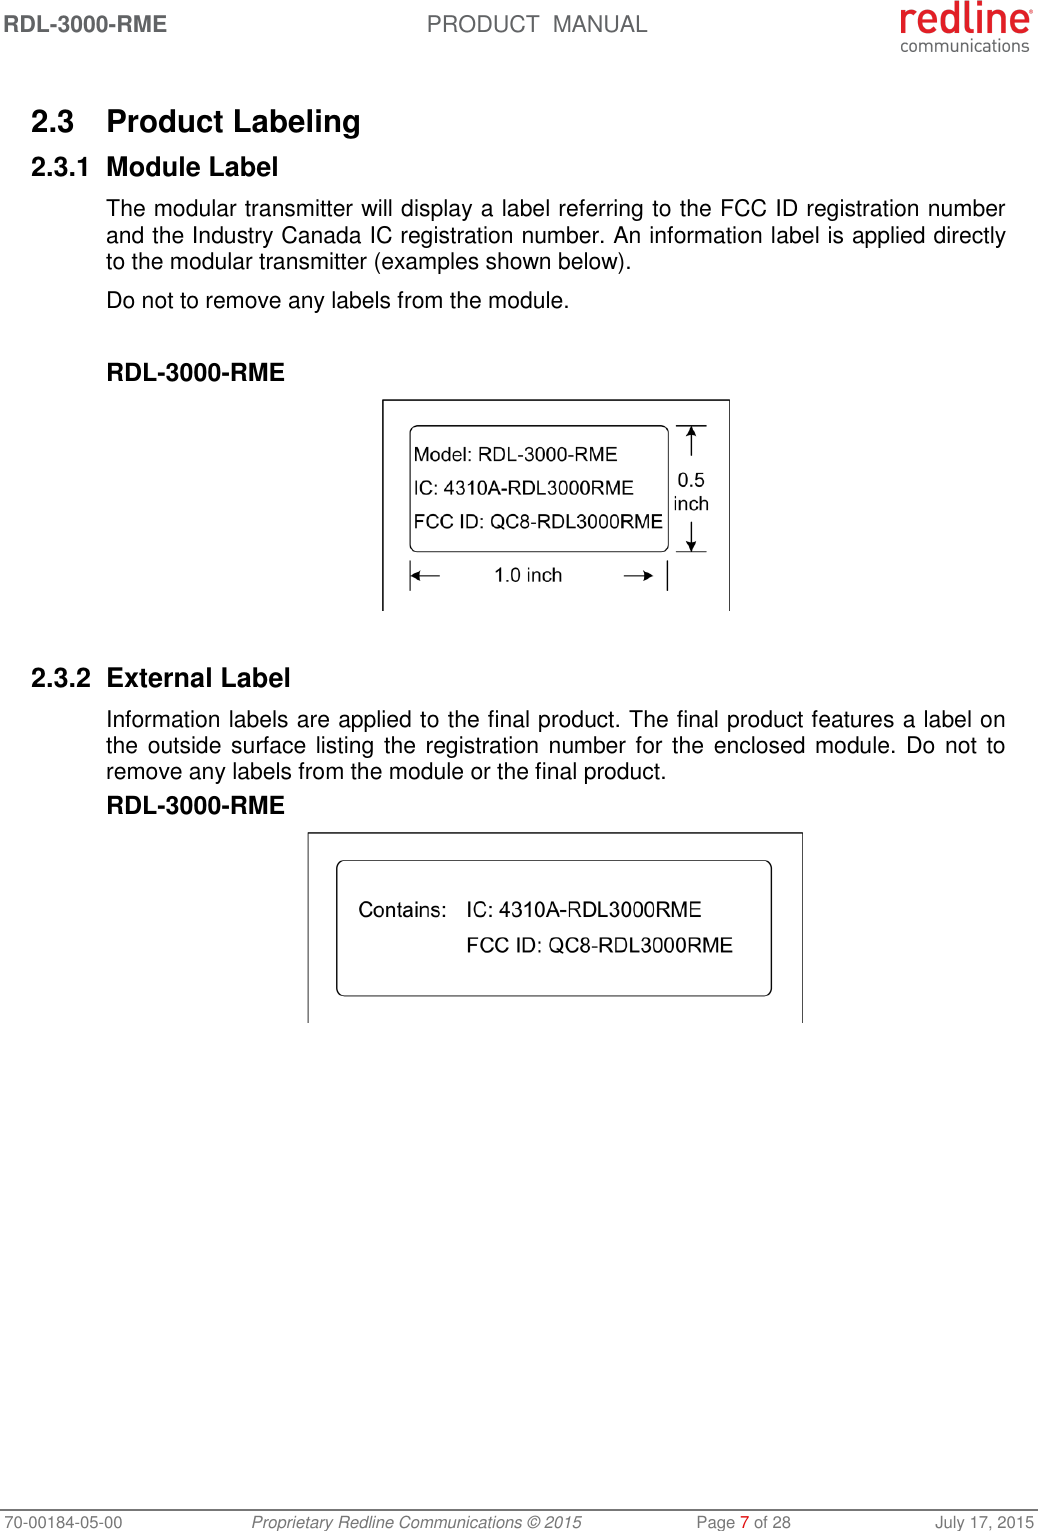 RDL-3000-RME  PRODUCT  MANUAL 70-00184-05-00 Proprietary Redline Communications © 2015  Page 7 of 28  July 17, 2015  2.3  Product Labeling 2.3.1  Module Label The modular transmitter will display a label referring to the FCC ID registration number and the Industry Canada IC registration number. An information label is applied directly to the modular transmitter (examples shown below). Do not to remove any labels from the module.  RDL-3000-RME   2.3.2  External Label Information labels are applied to the final product. The final product features a label on the outside surface listing the registration number for the enclosed module. Do  not to remove any labels from the module or the final product. RDL-3000-RME   